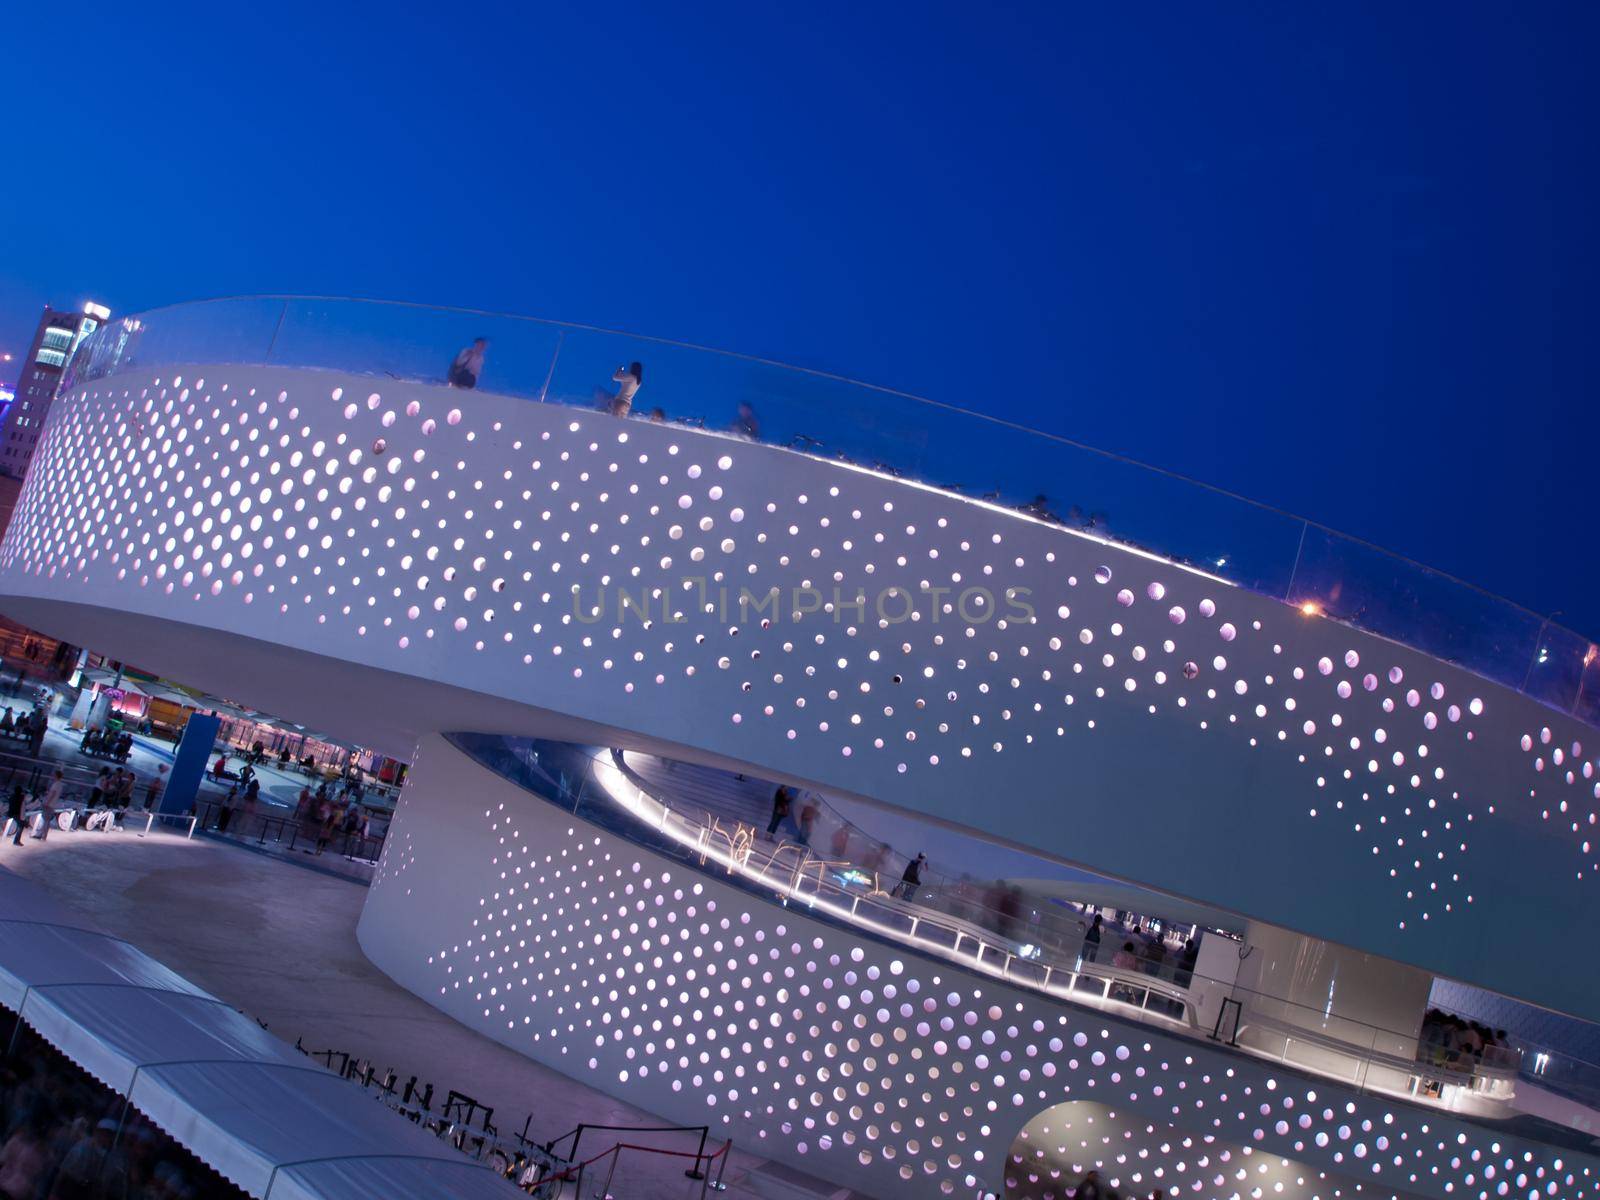 Exterior of the Denmark Pavilion at the EXPO 2010 Shanghai, China.